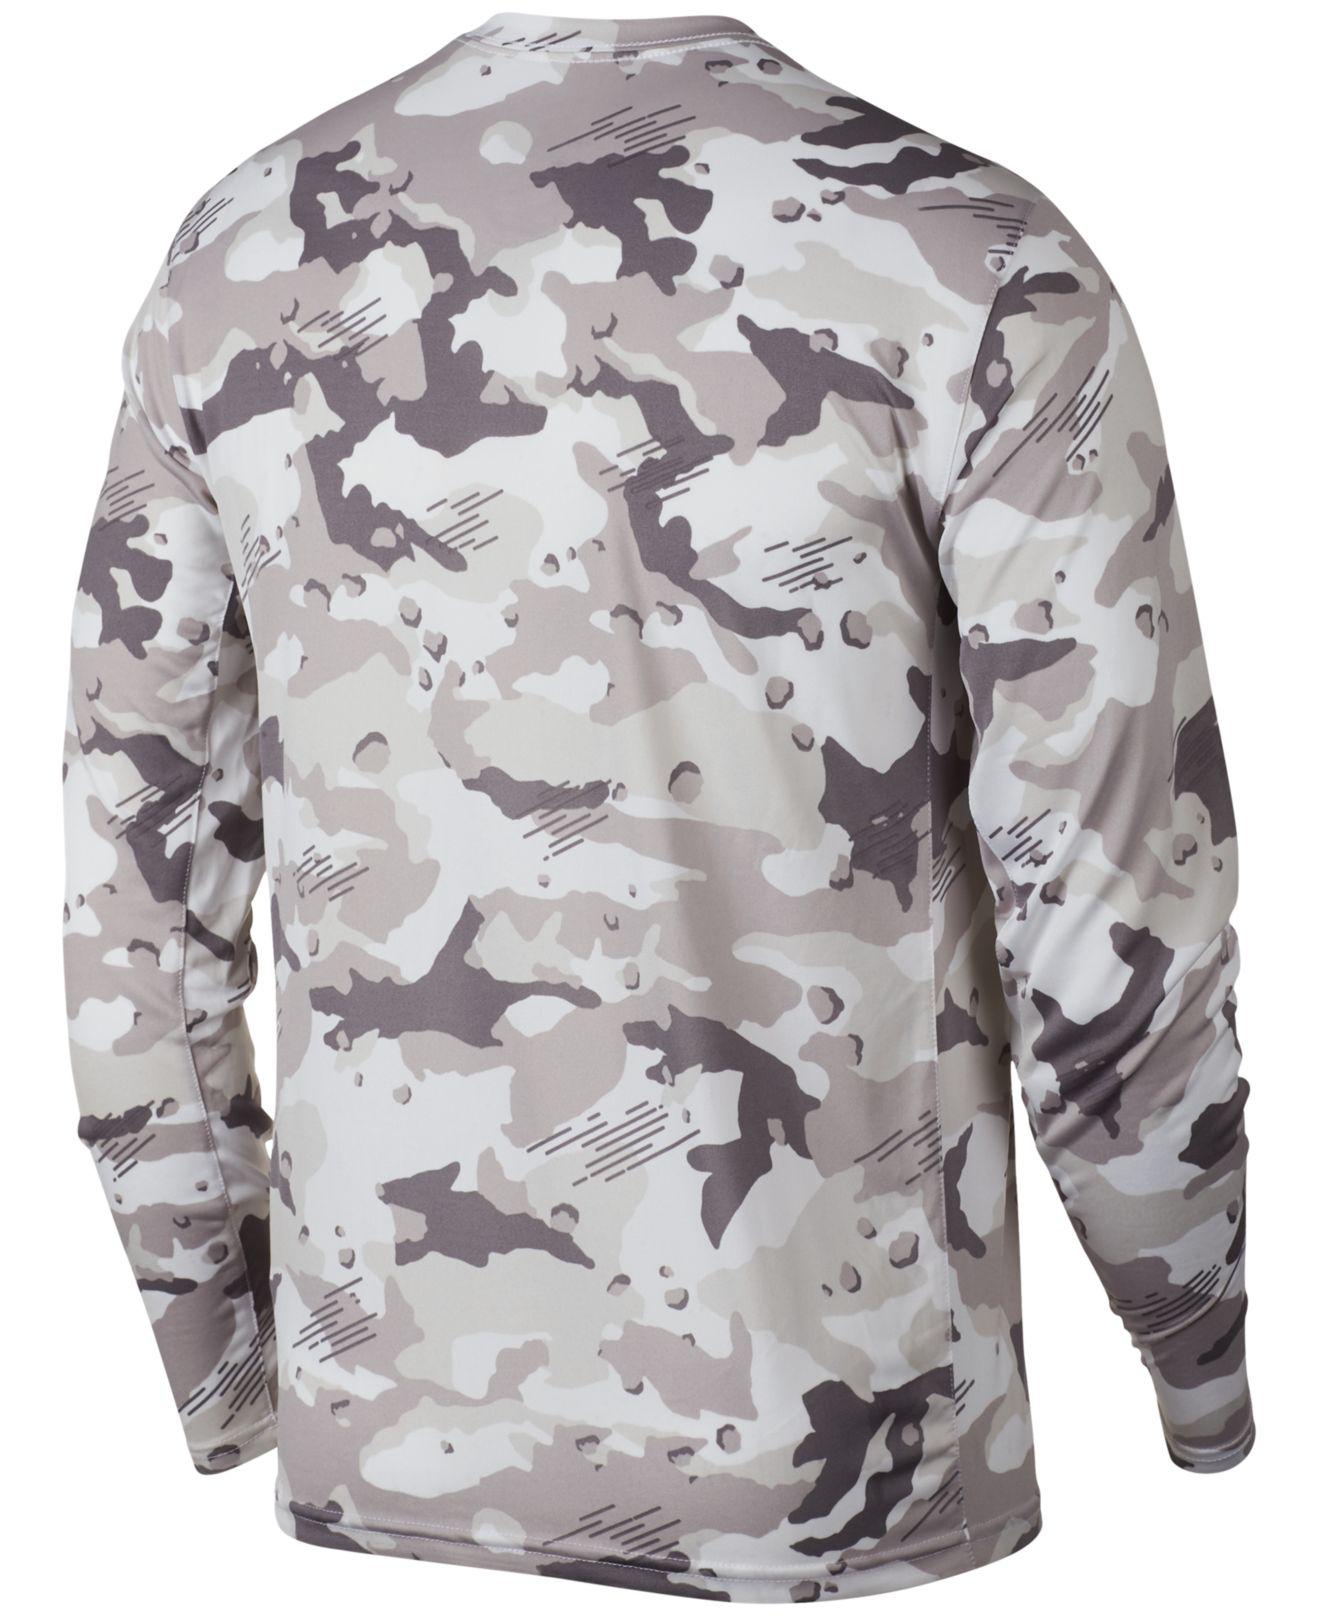 Nike Synthetic Dry Legend Camo Long Sleeve Tee in White/Black (Gray ...